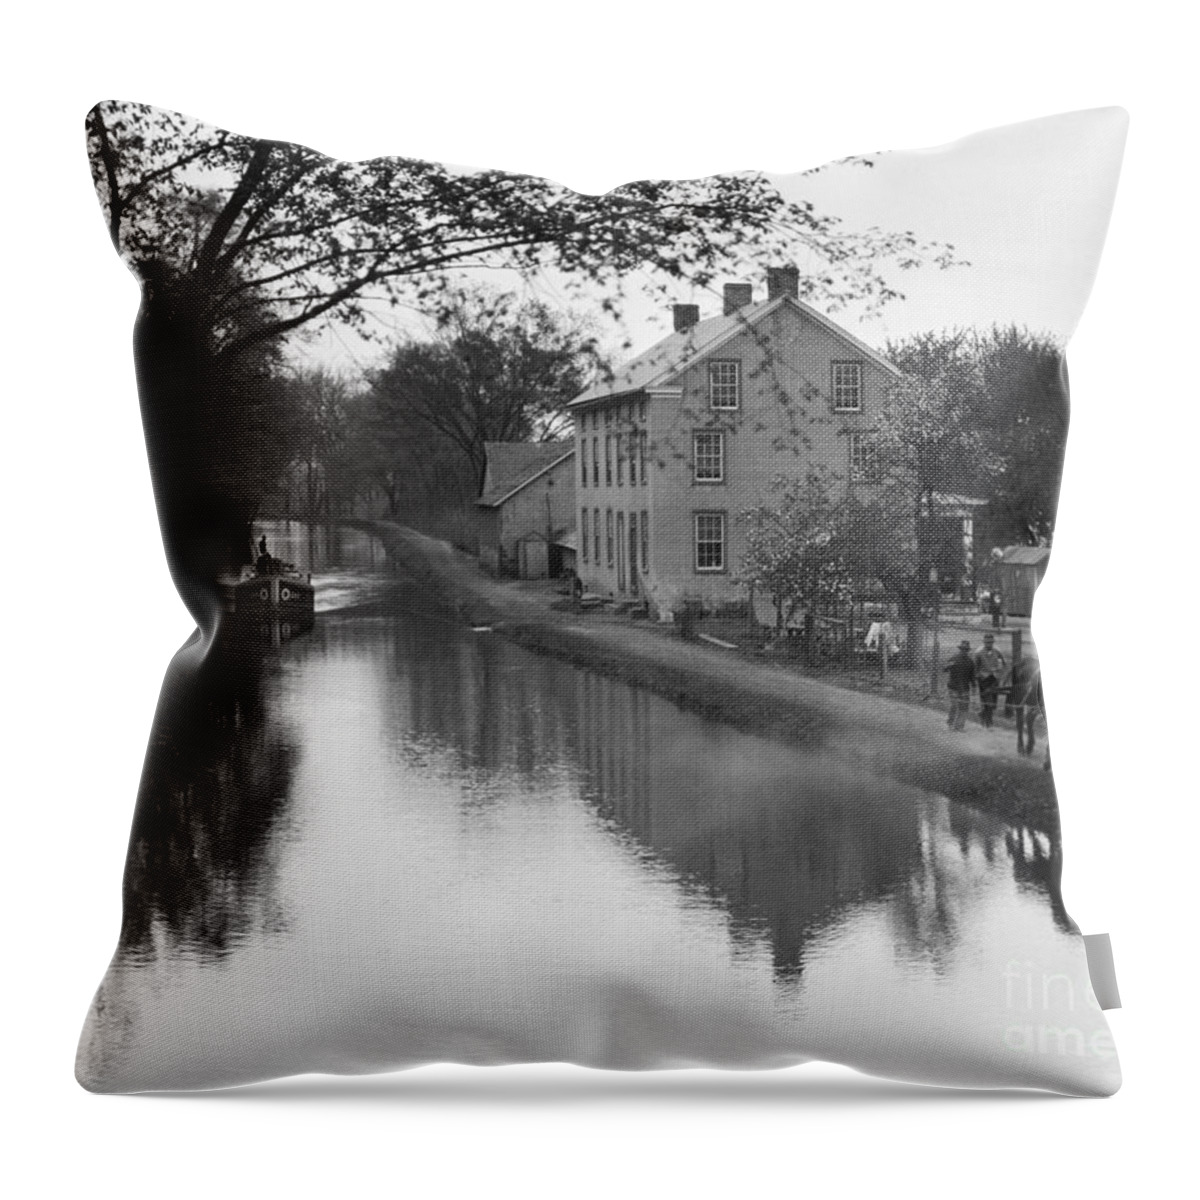 1920s Throw Pillow featuring the photograph Mules Towing Boat Down Lehigh, C.1920s by H. Armstrong Roberts/ClassicStock